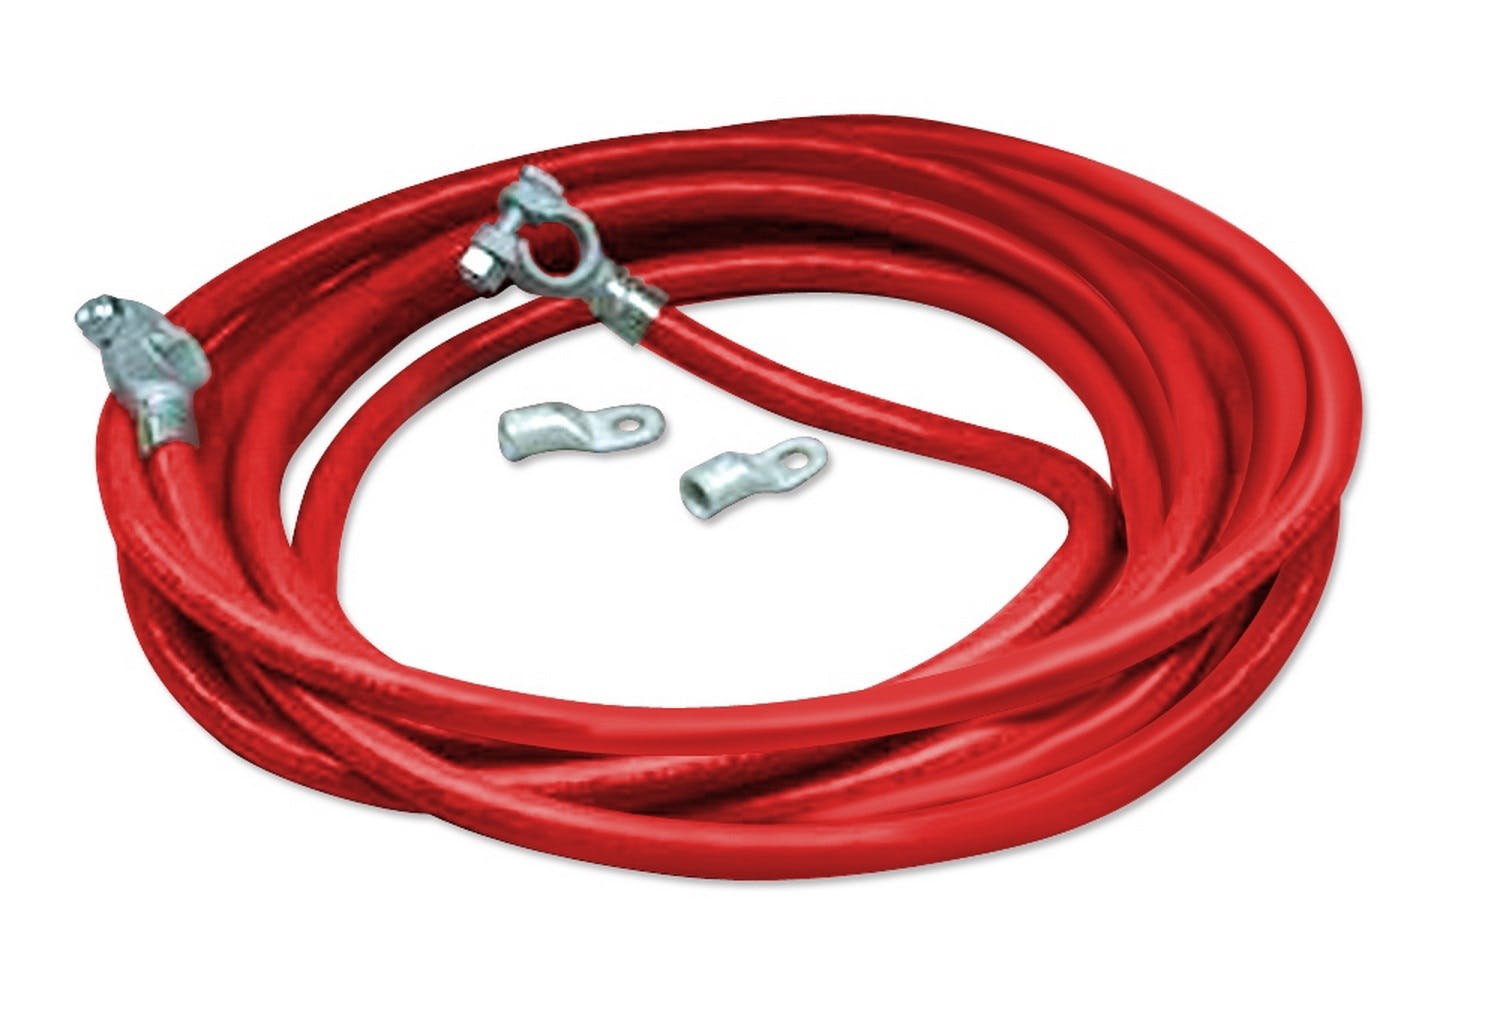 Taylor Cable Products 21540 1/0 ga red 20ft Battery Cable Kit